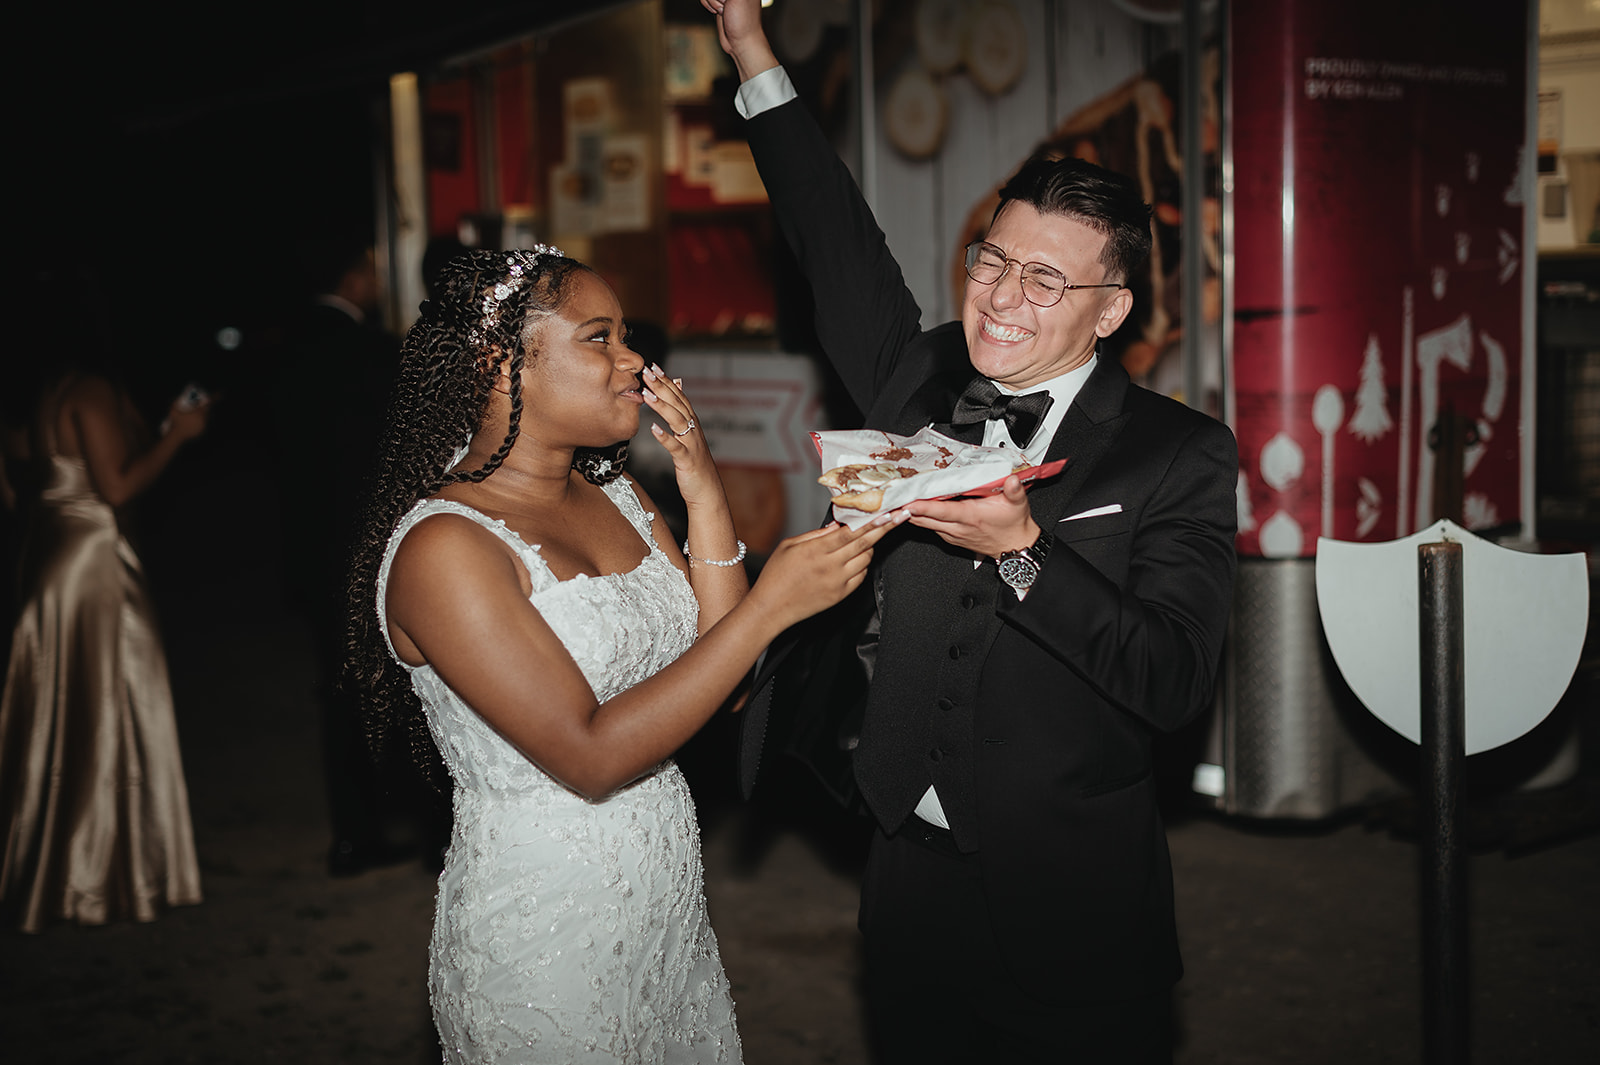 Beaver Tails at wedding reception Darby Mitchell Photography